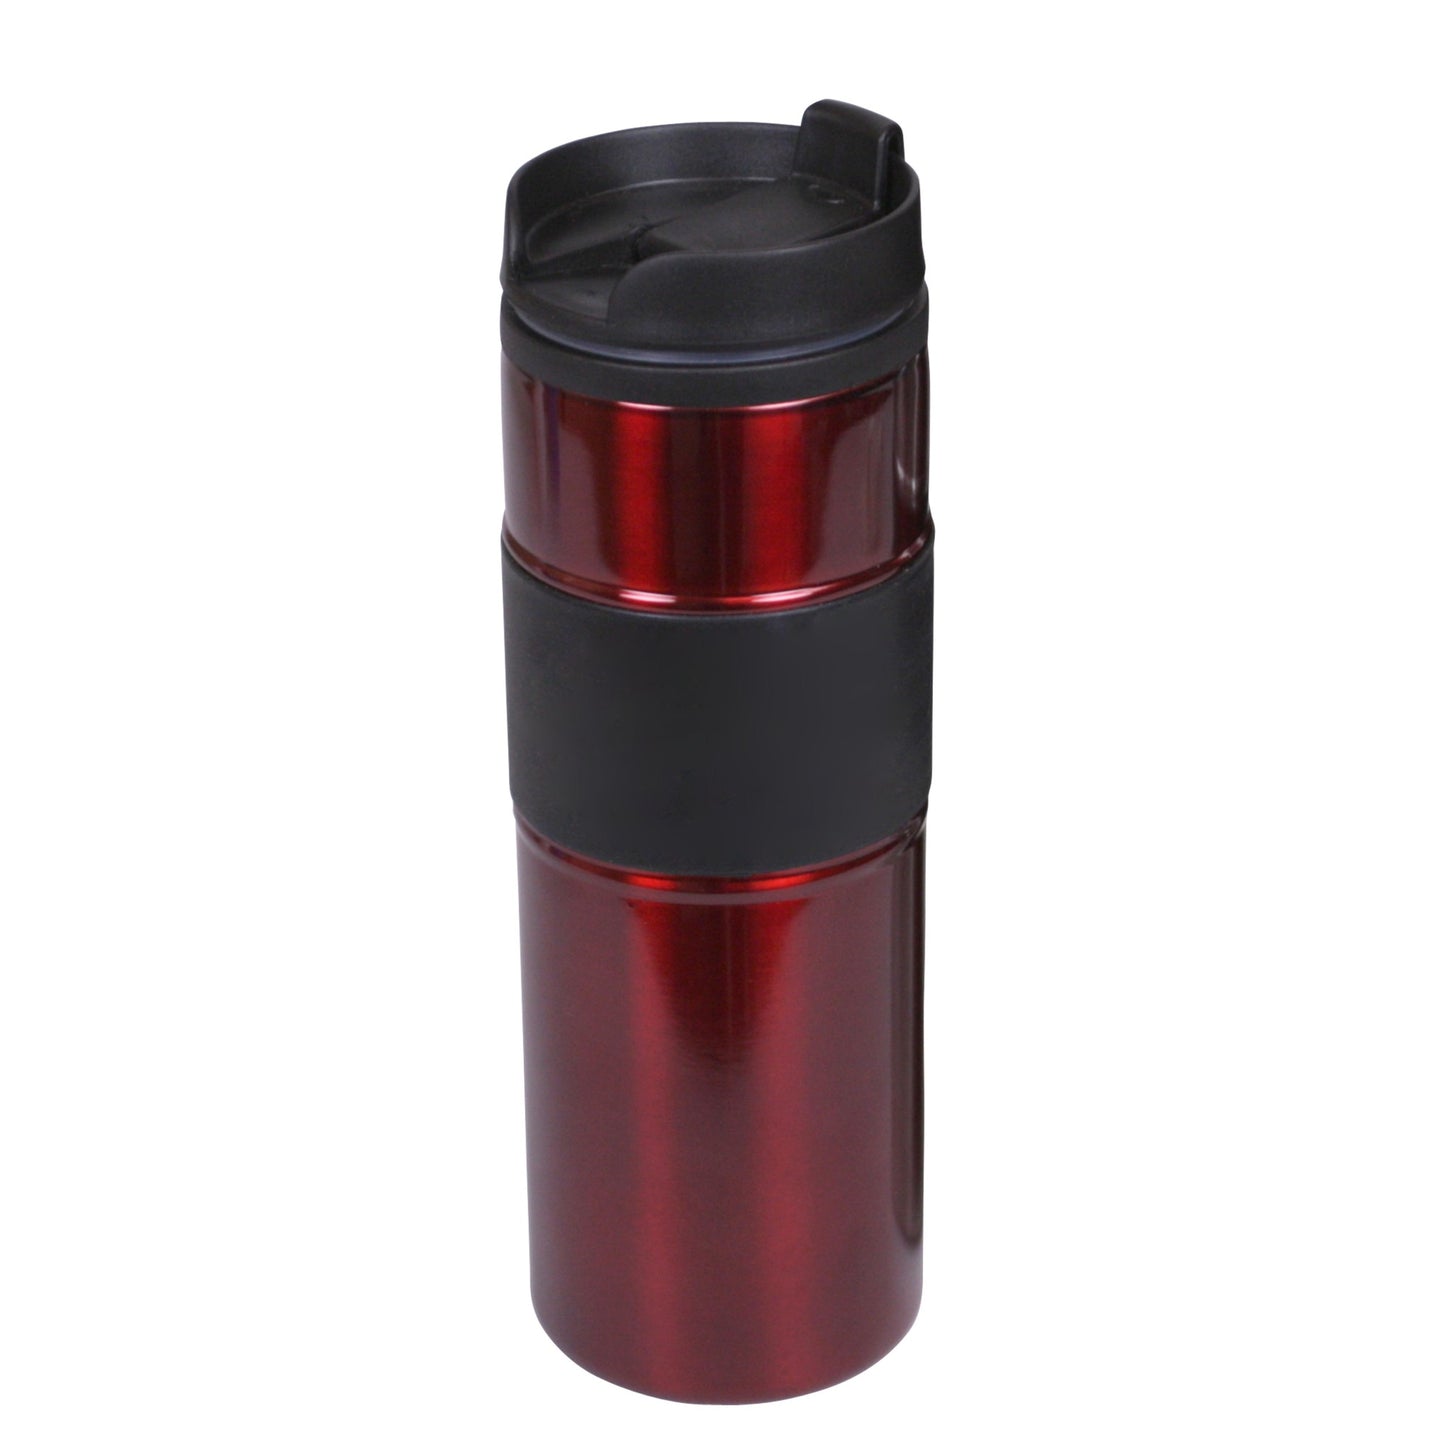 Home Basics Stainless Steel Travel Mug with Rubber Grip - Red